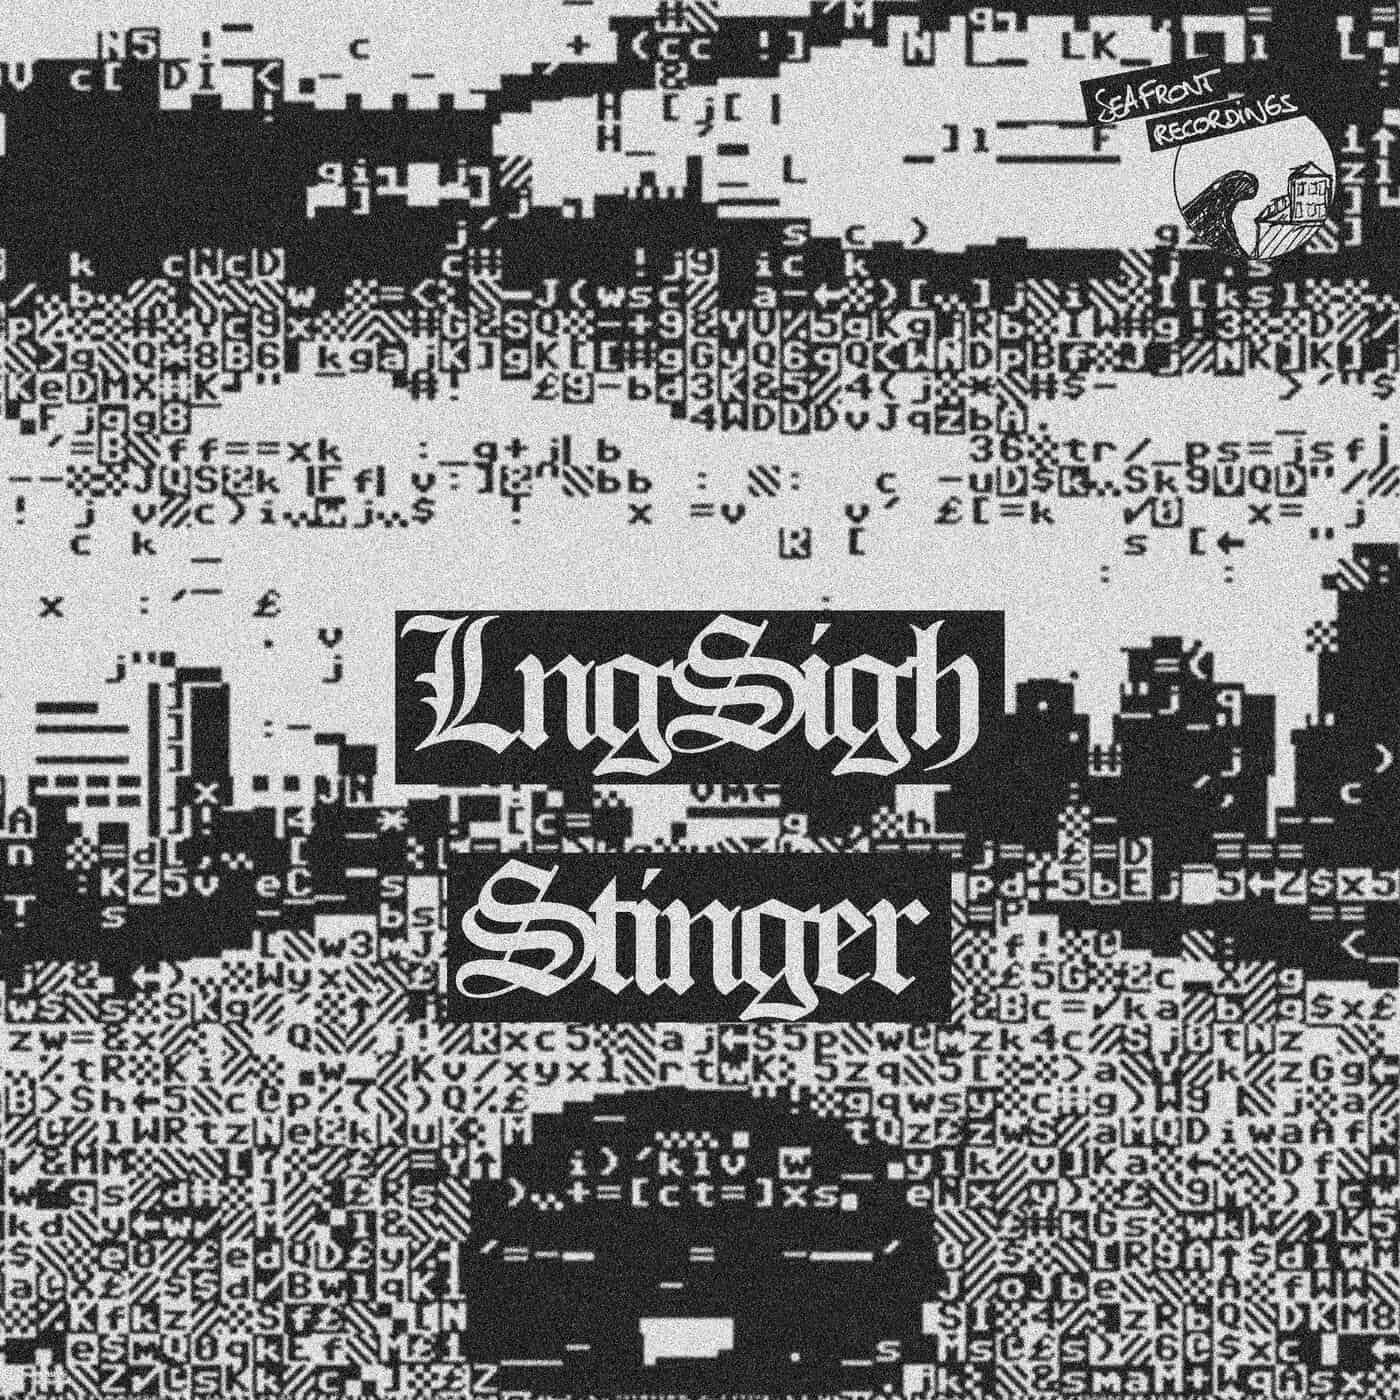 image cover: Lngsigh, Little by Little - Stinger / SEAF032